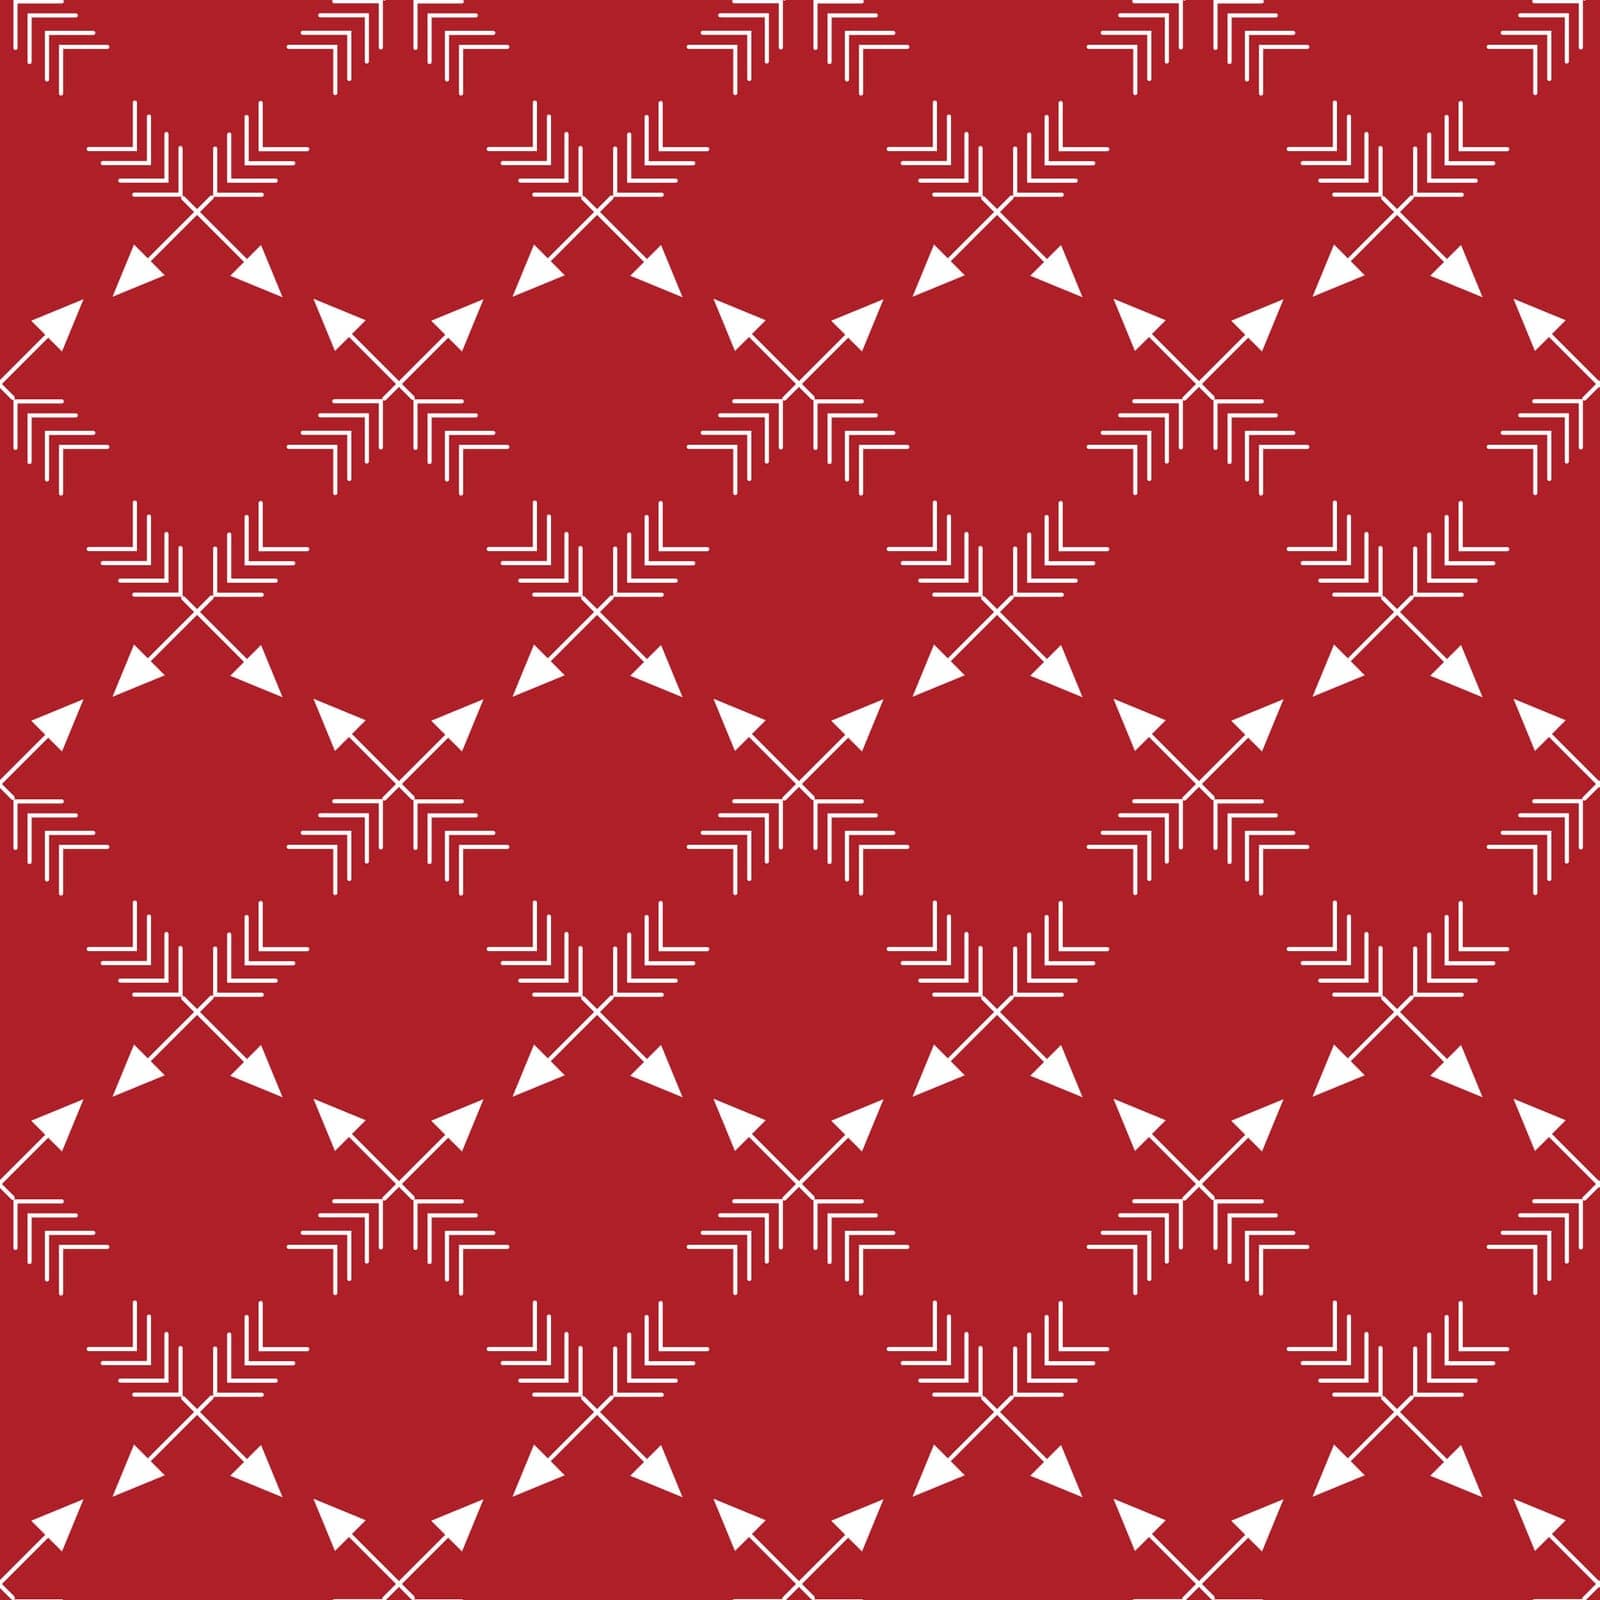 Geometric seamless pattern with repetitive crossed arrows on red backdrop for Christmas theme designs.vector illustration